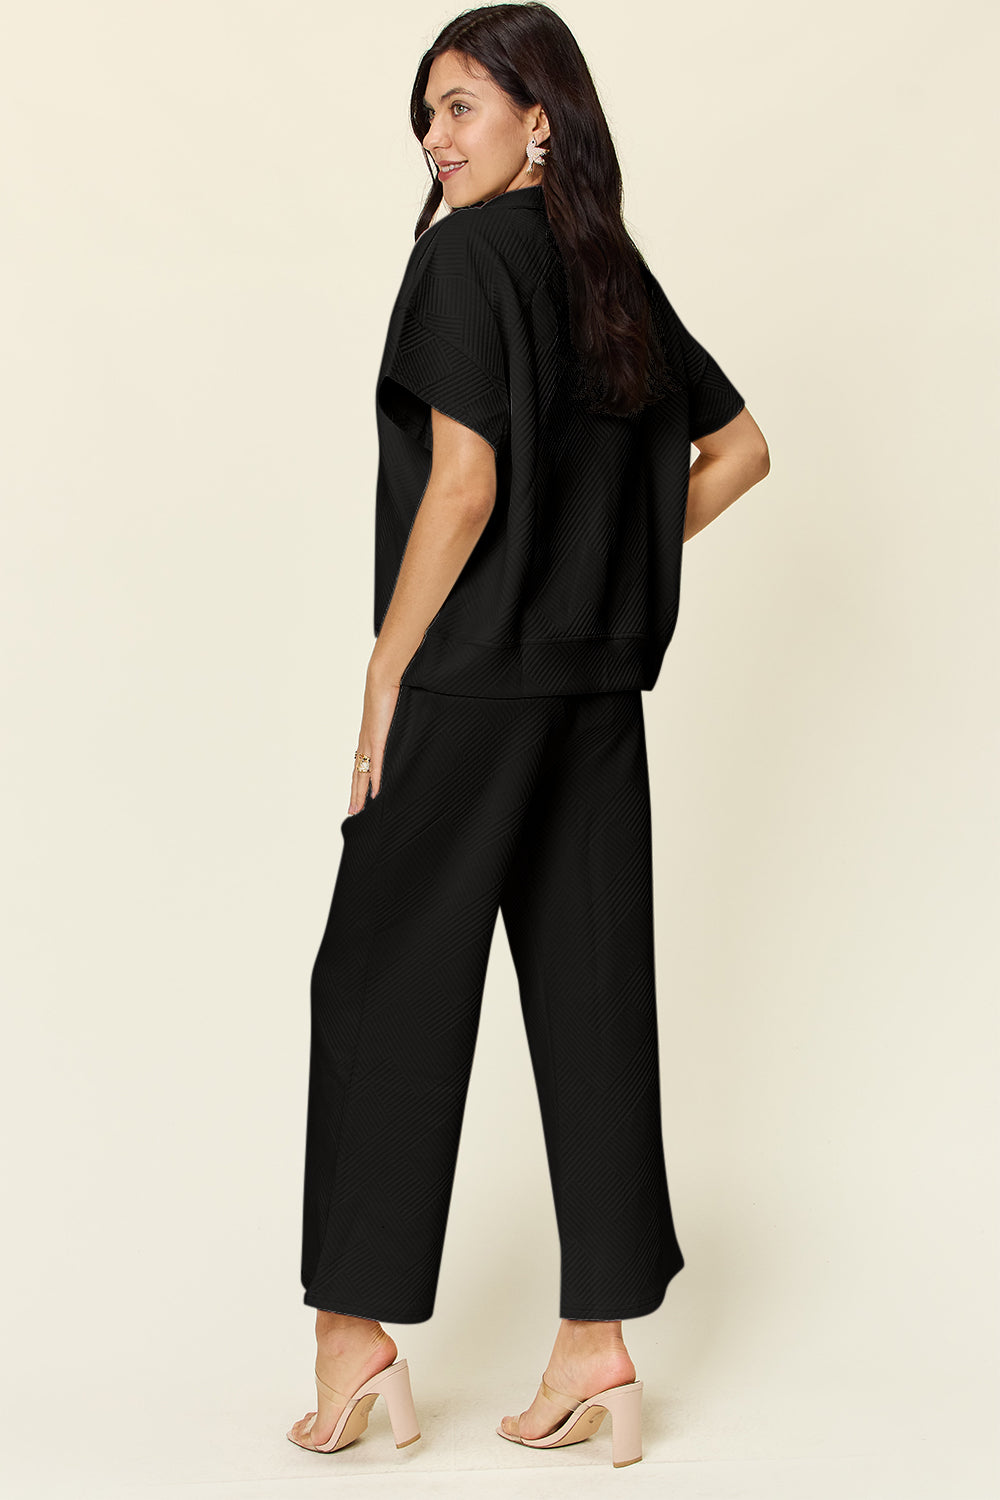 Pre-Order Double Take Full Size Texture Half Zip Short Sleeve Top and Pants Set